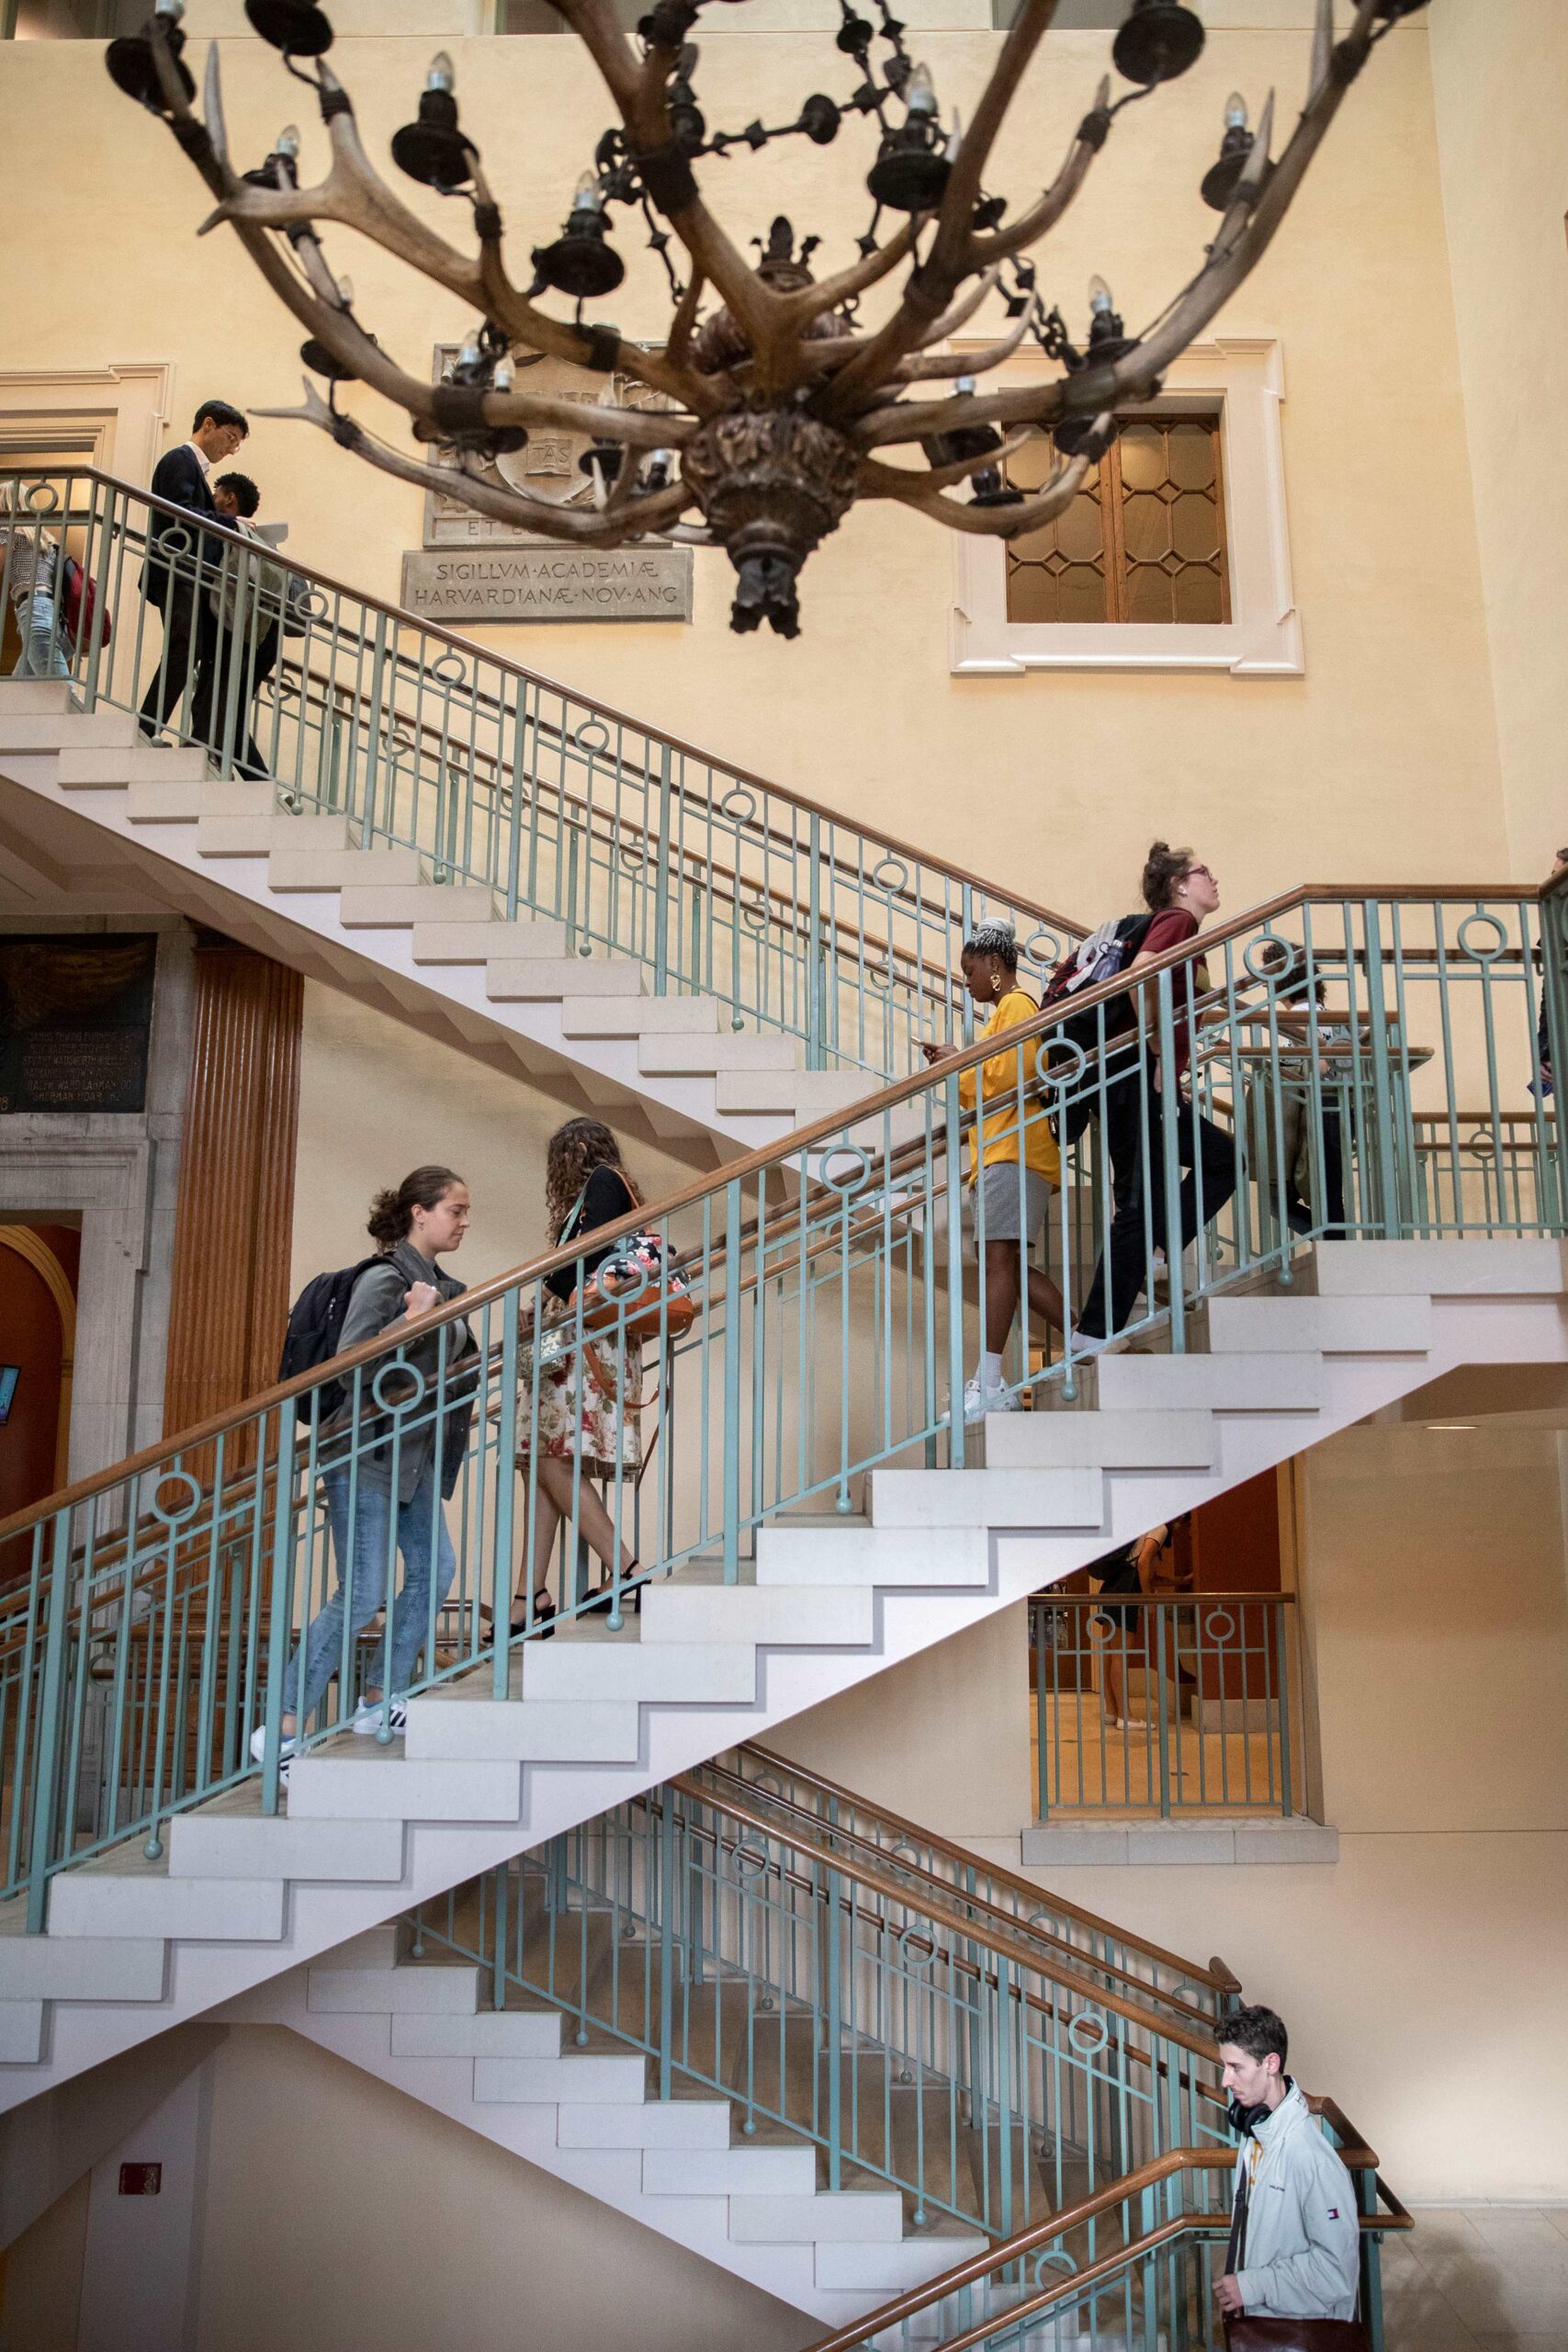 Students walking up and down a three level staircase under a decorative chandelier.